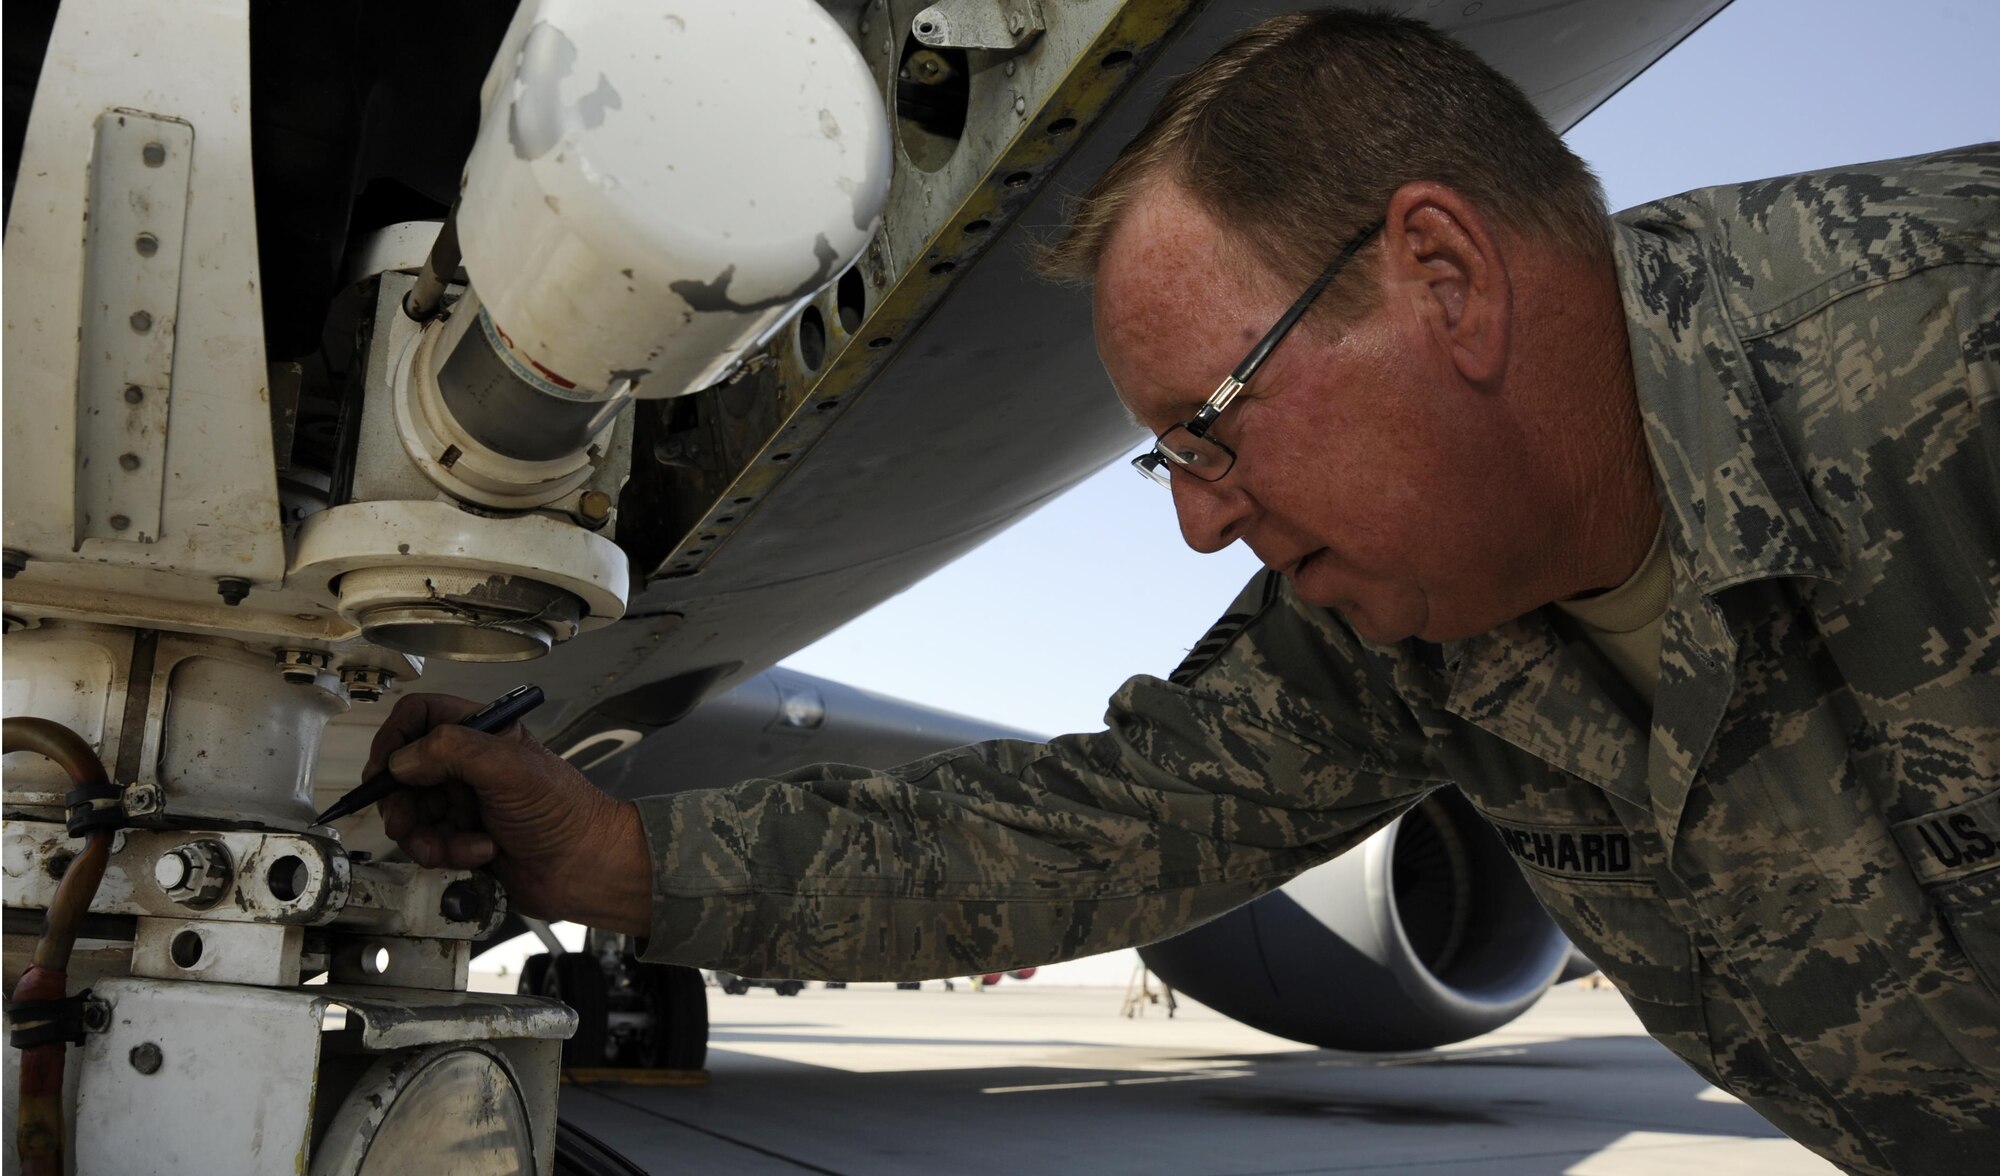 Master Sgt. Timothy Blanchard marks the nose wheel steering travel during an operations check after reinstallation on a KC-135 Stratotanker Nov. 26, 2013, at the 379th Air Expeditionary Wing in Southwest Asia. The aero repair shop has performed more than 350 major aircraft repairs this year, saving the Air Force money in maintenance and estimated shipping costs. Blanchard is a 379th Expeditionary Maintenance Squadron repair and reclamation technician.